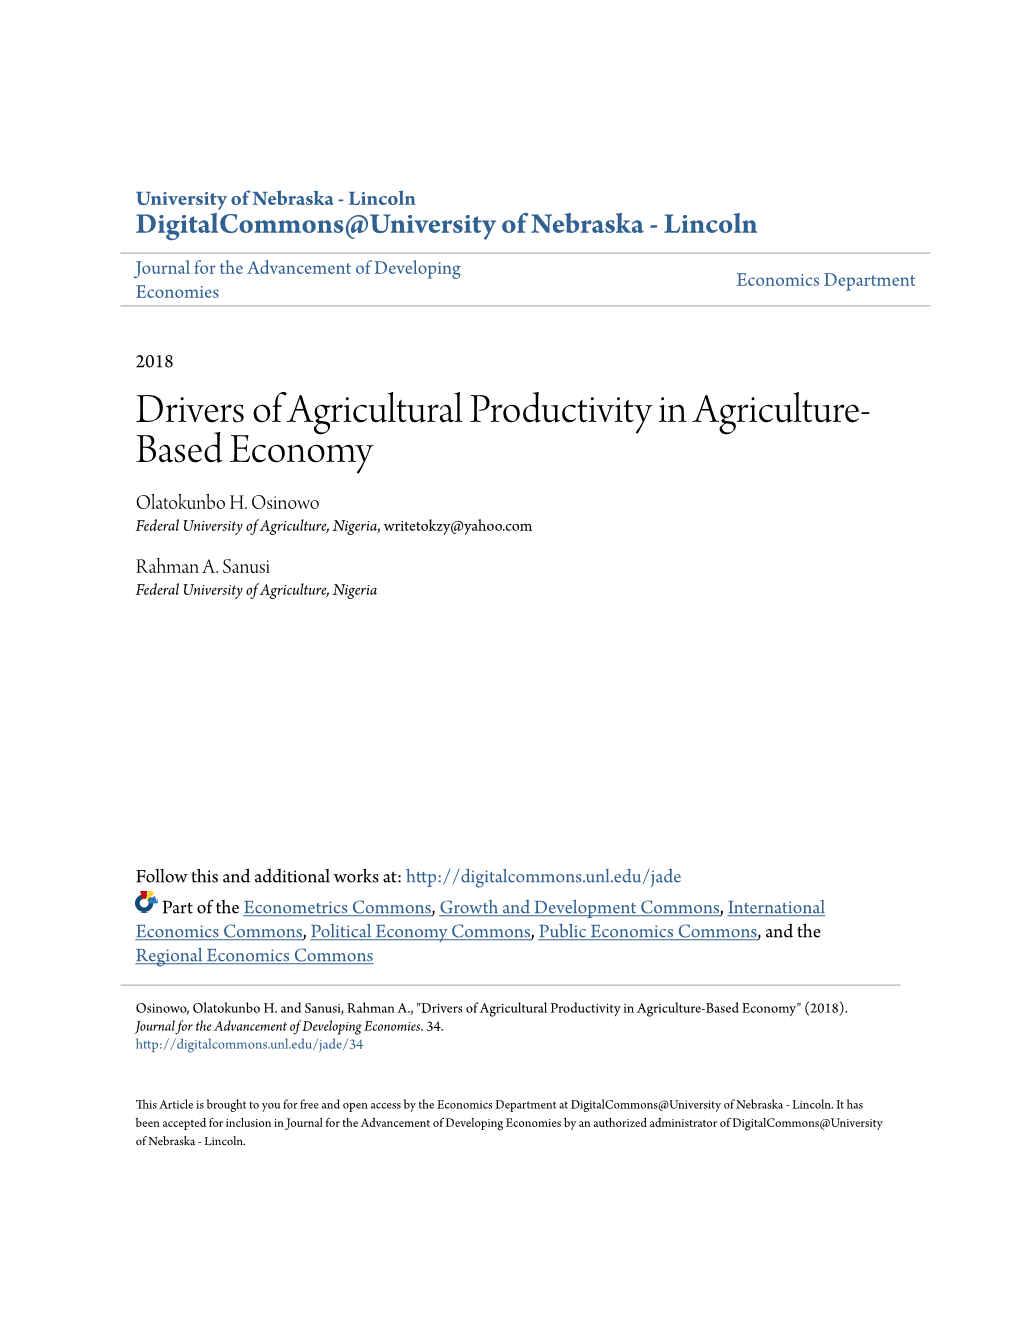 Drivers of Agricultural Productivity in Agriculture-Based Economy" (2018)